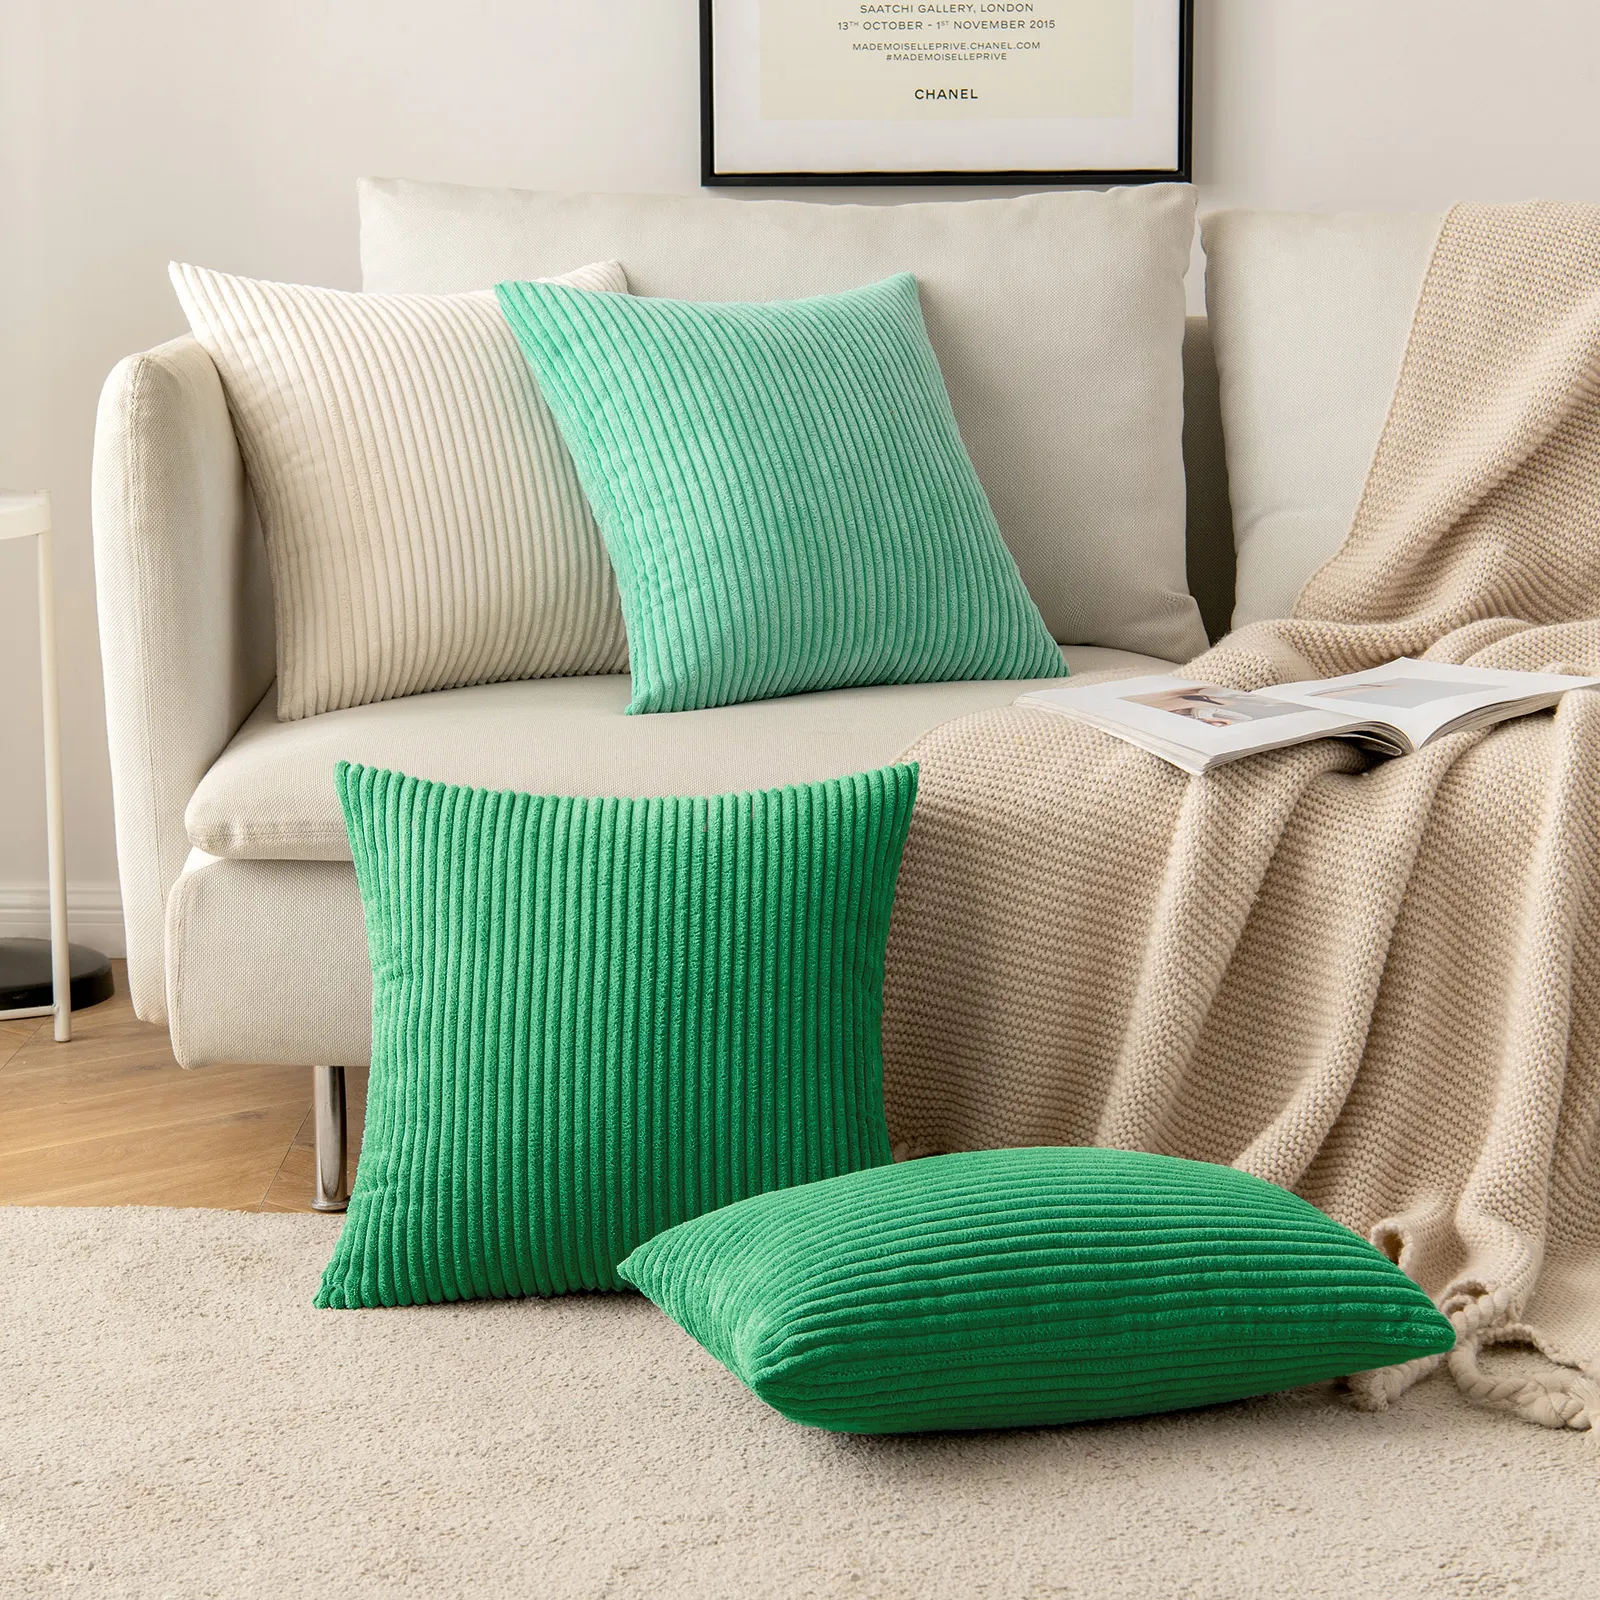 Wholesale Soft Solid Square Corduroy Throw Pillow Covers Striped Corduroy Cushion Covers Home Decorative Pillows for Sofa Couch